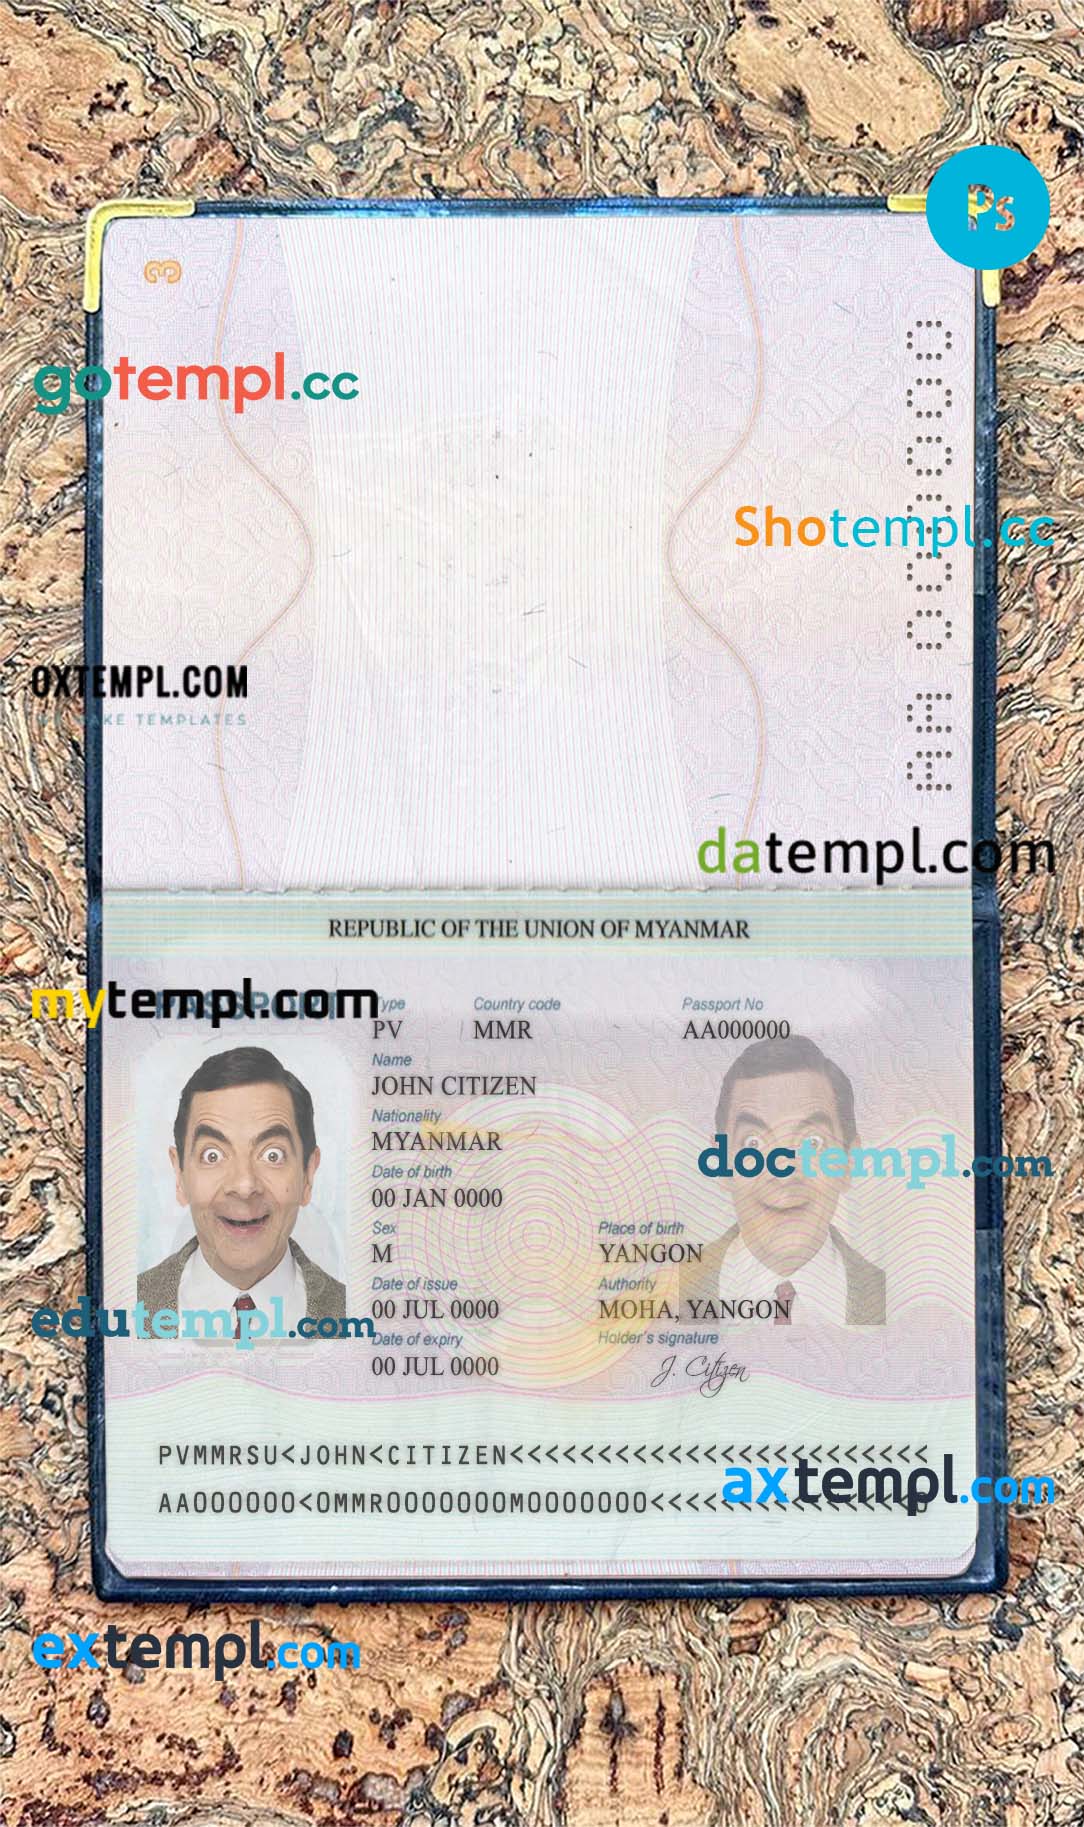 South Sudan passport editable PSD files, scan and photo-realistic look, 2 in 1